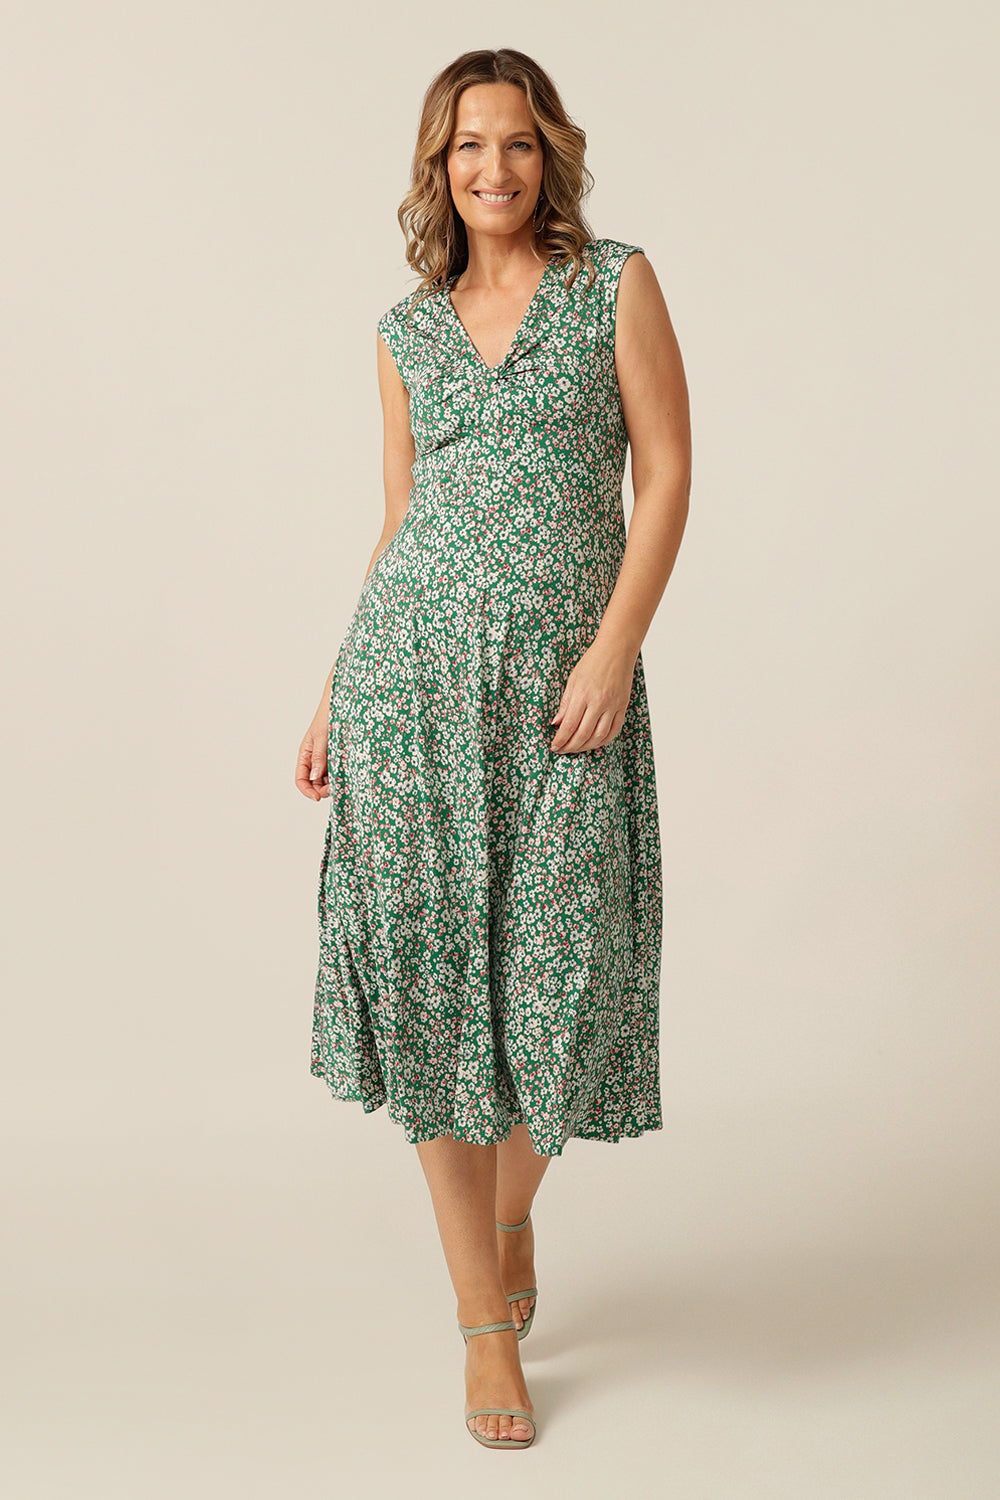 Sleeveless summer jersey dress with twist front bodice and below-the -knee skirt. The best dress for parties, summer events and barbeques! Made in Australia for petite to plus size women.